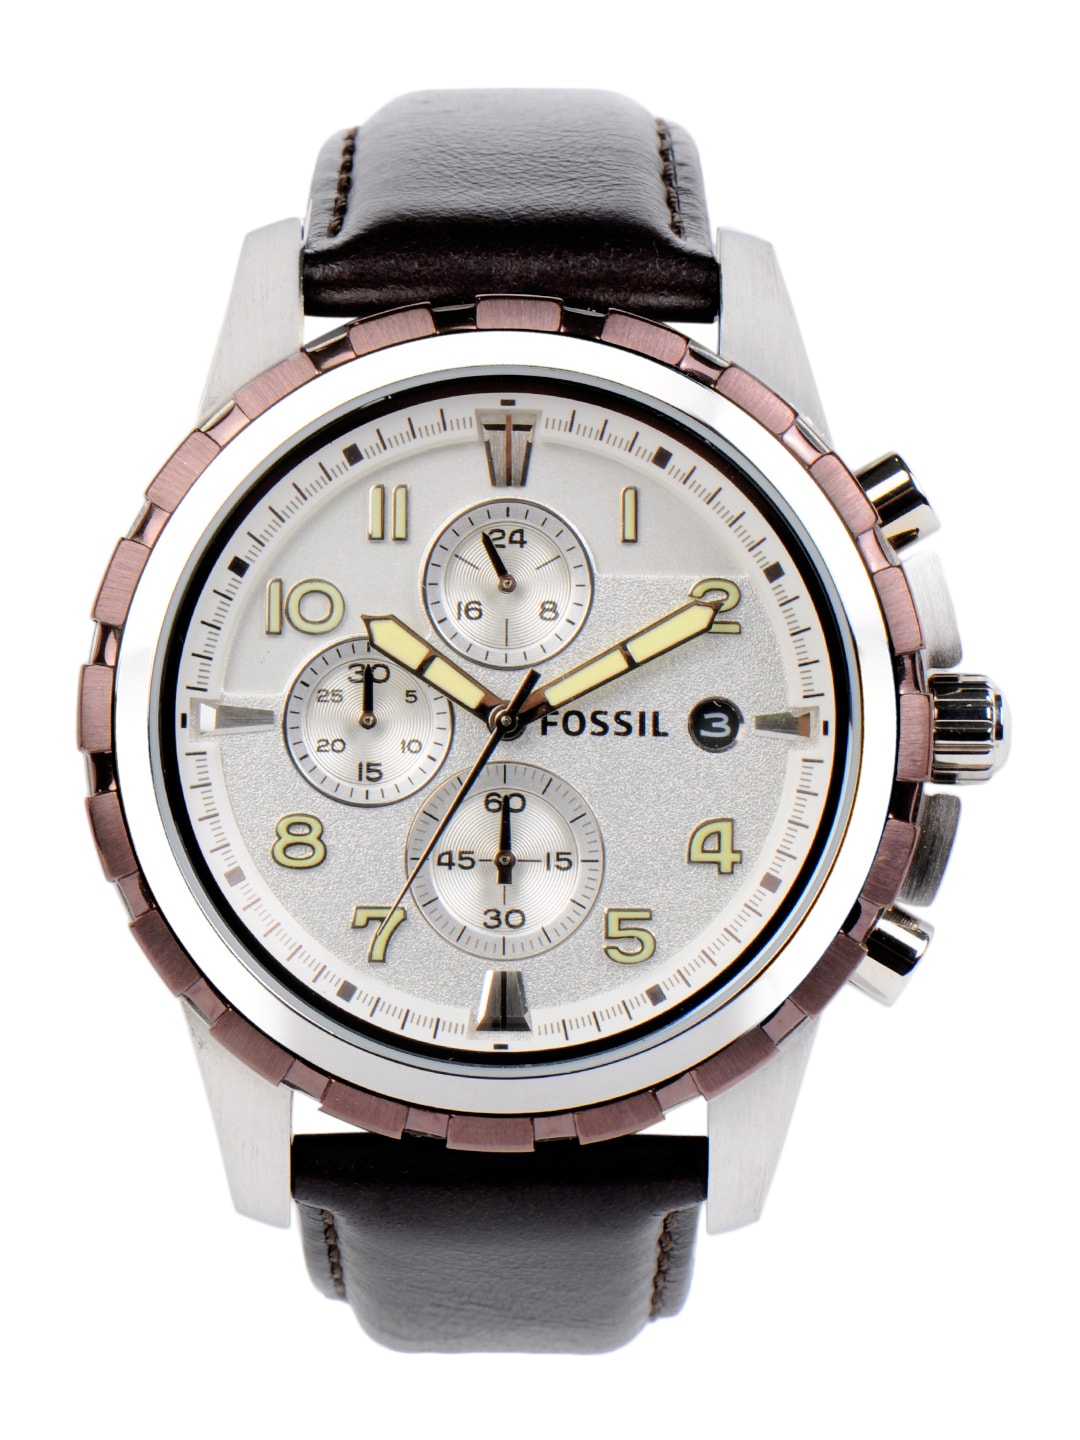 Fossil Men Silver Dial Chronograph Watch FS4543